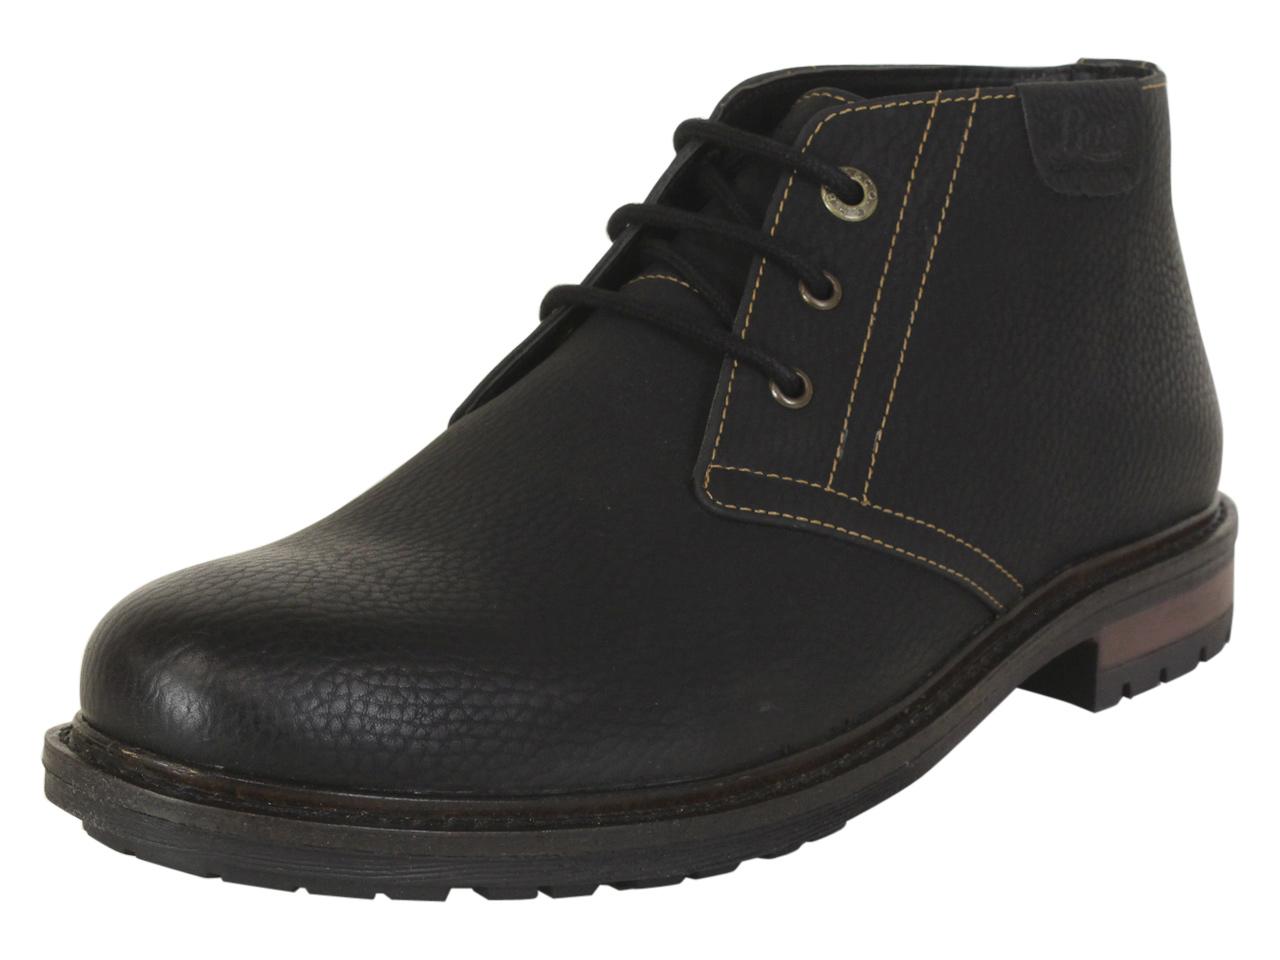 Rover-Tumbled-WX Chukka Boots Shoes